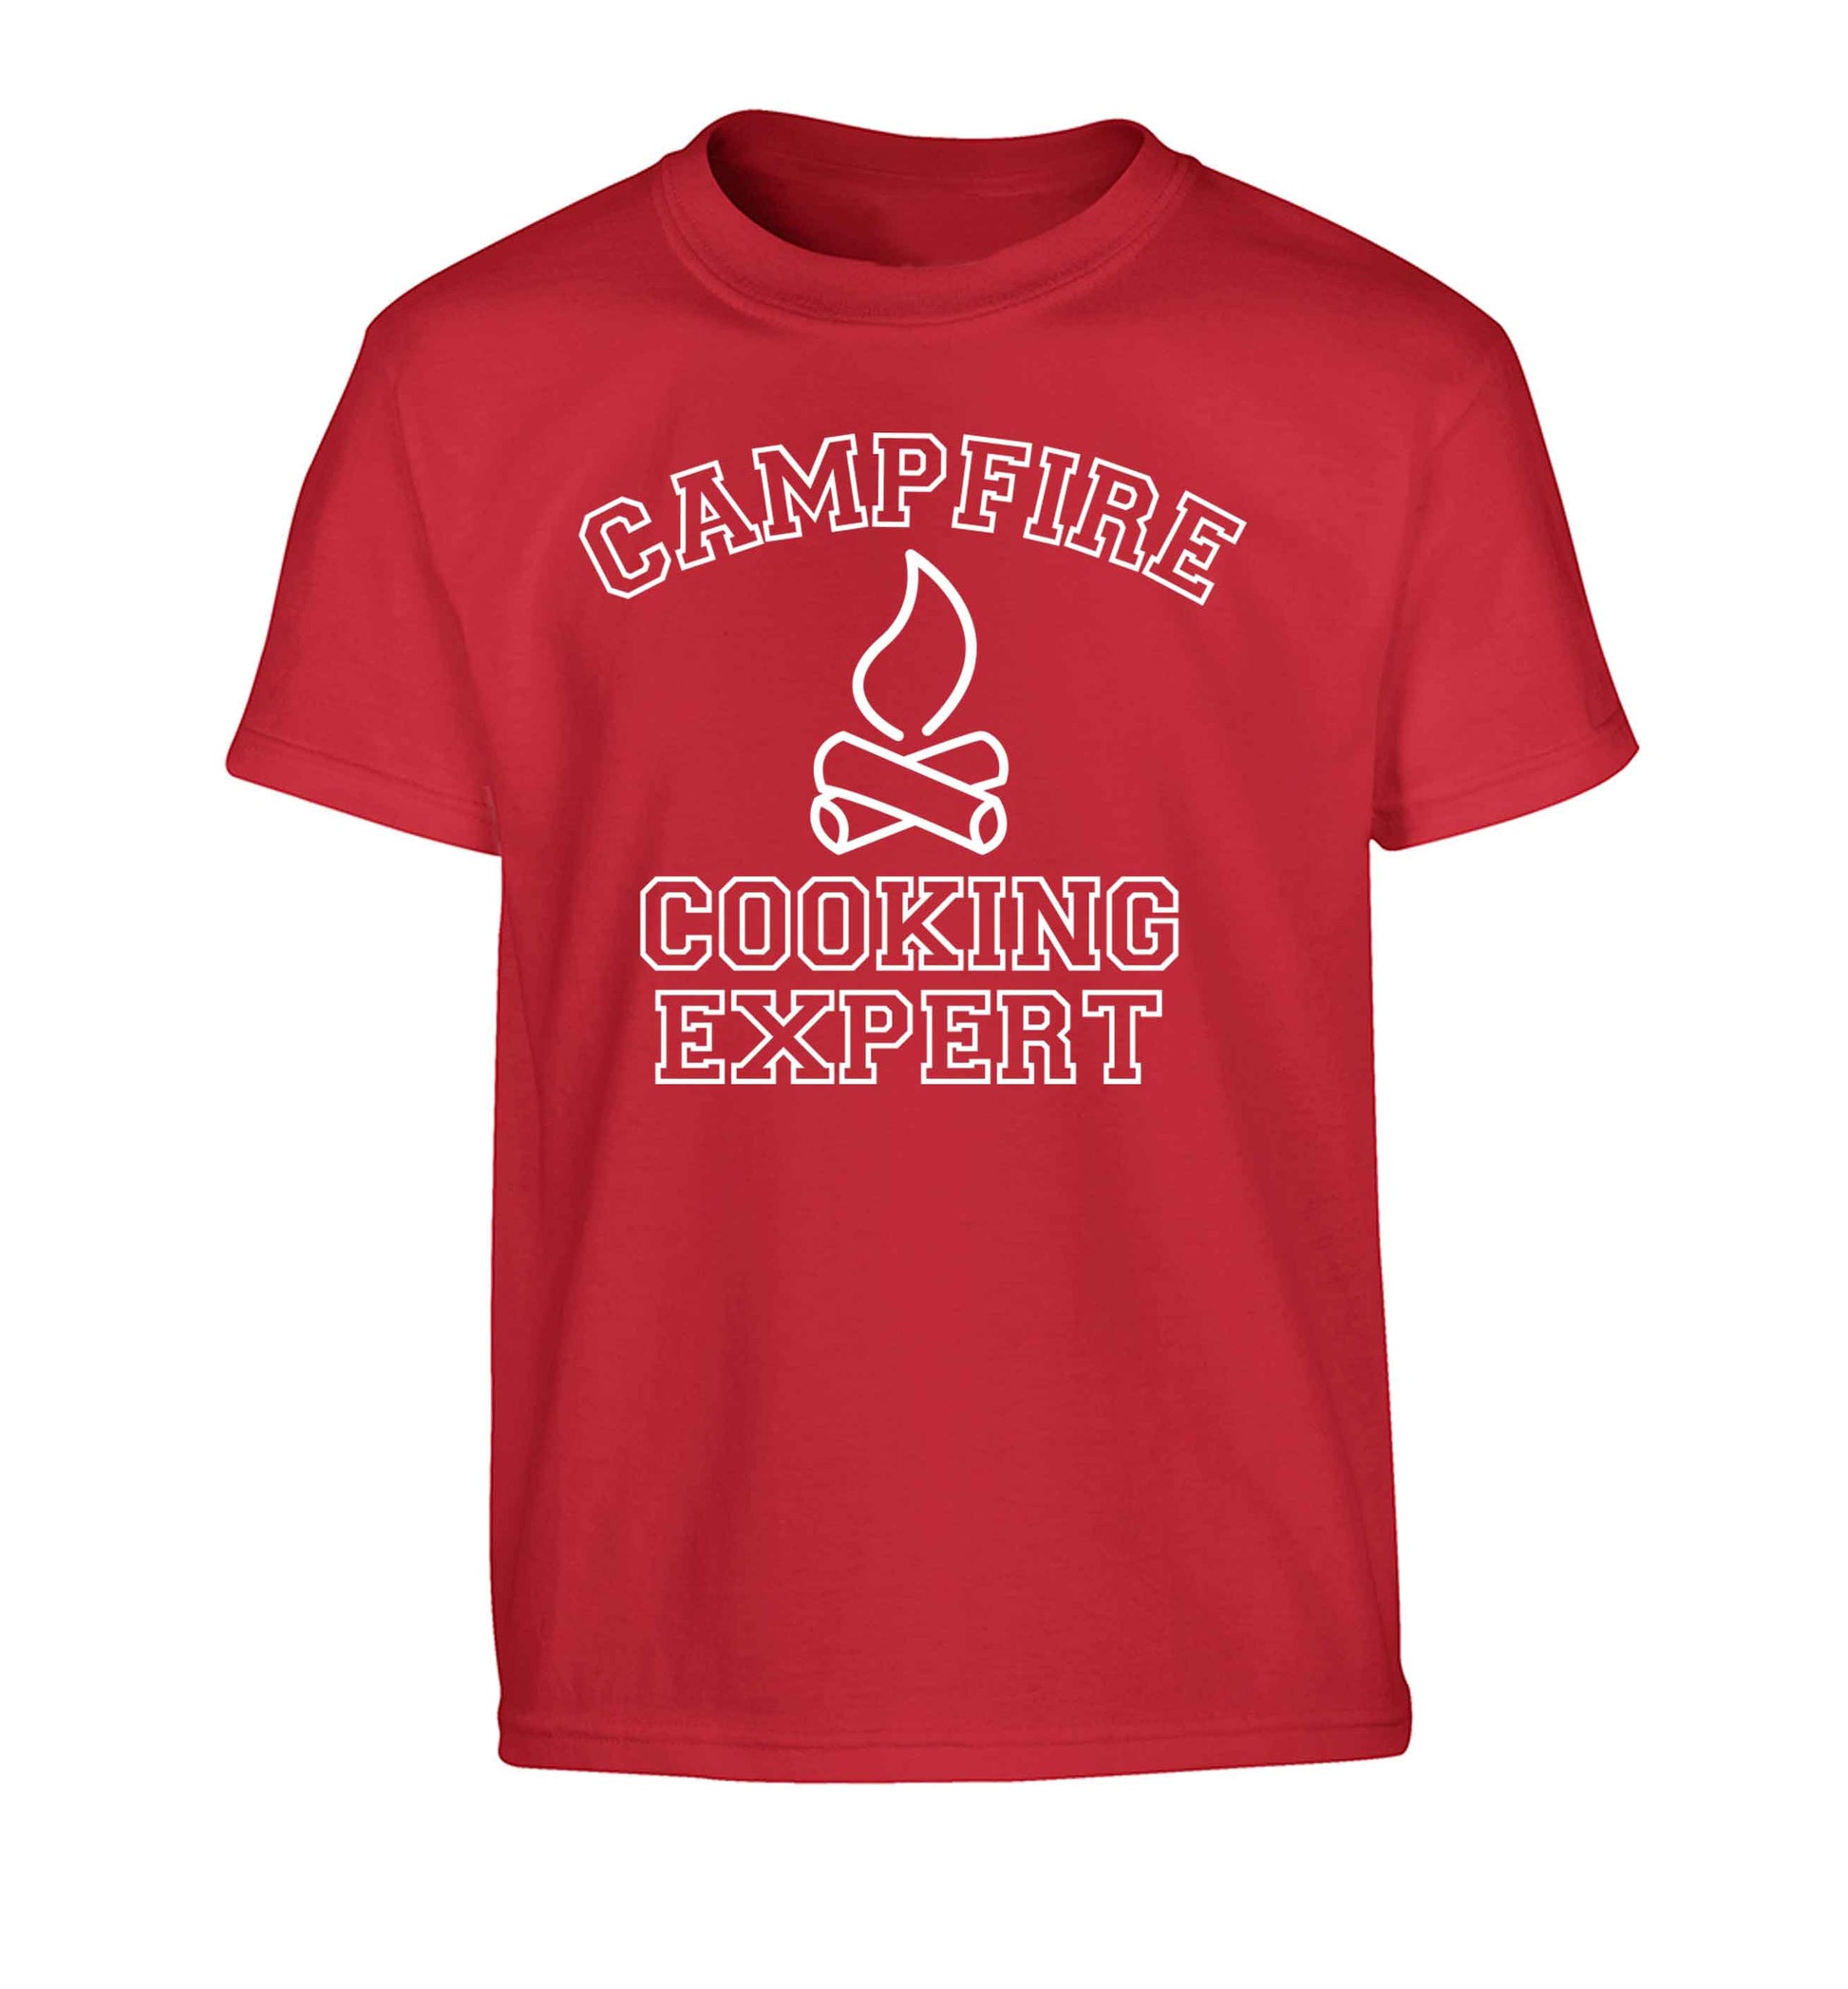 Campfire cooking expert Children's red Tshirt 12-13 Years